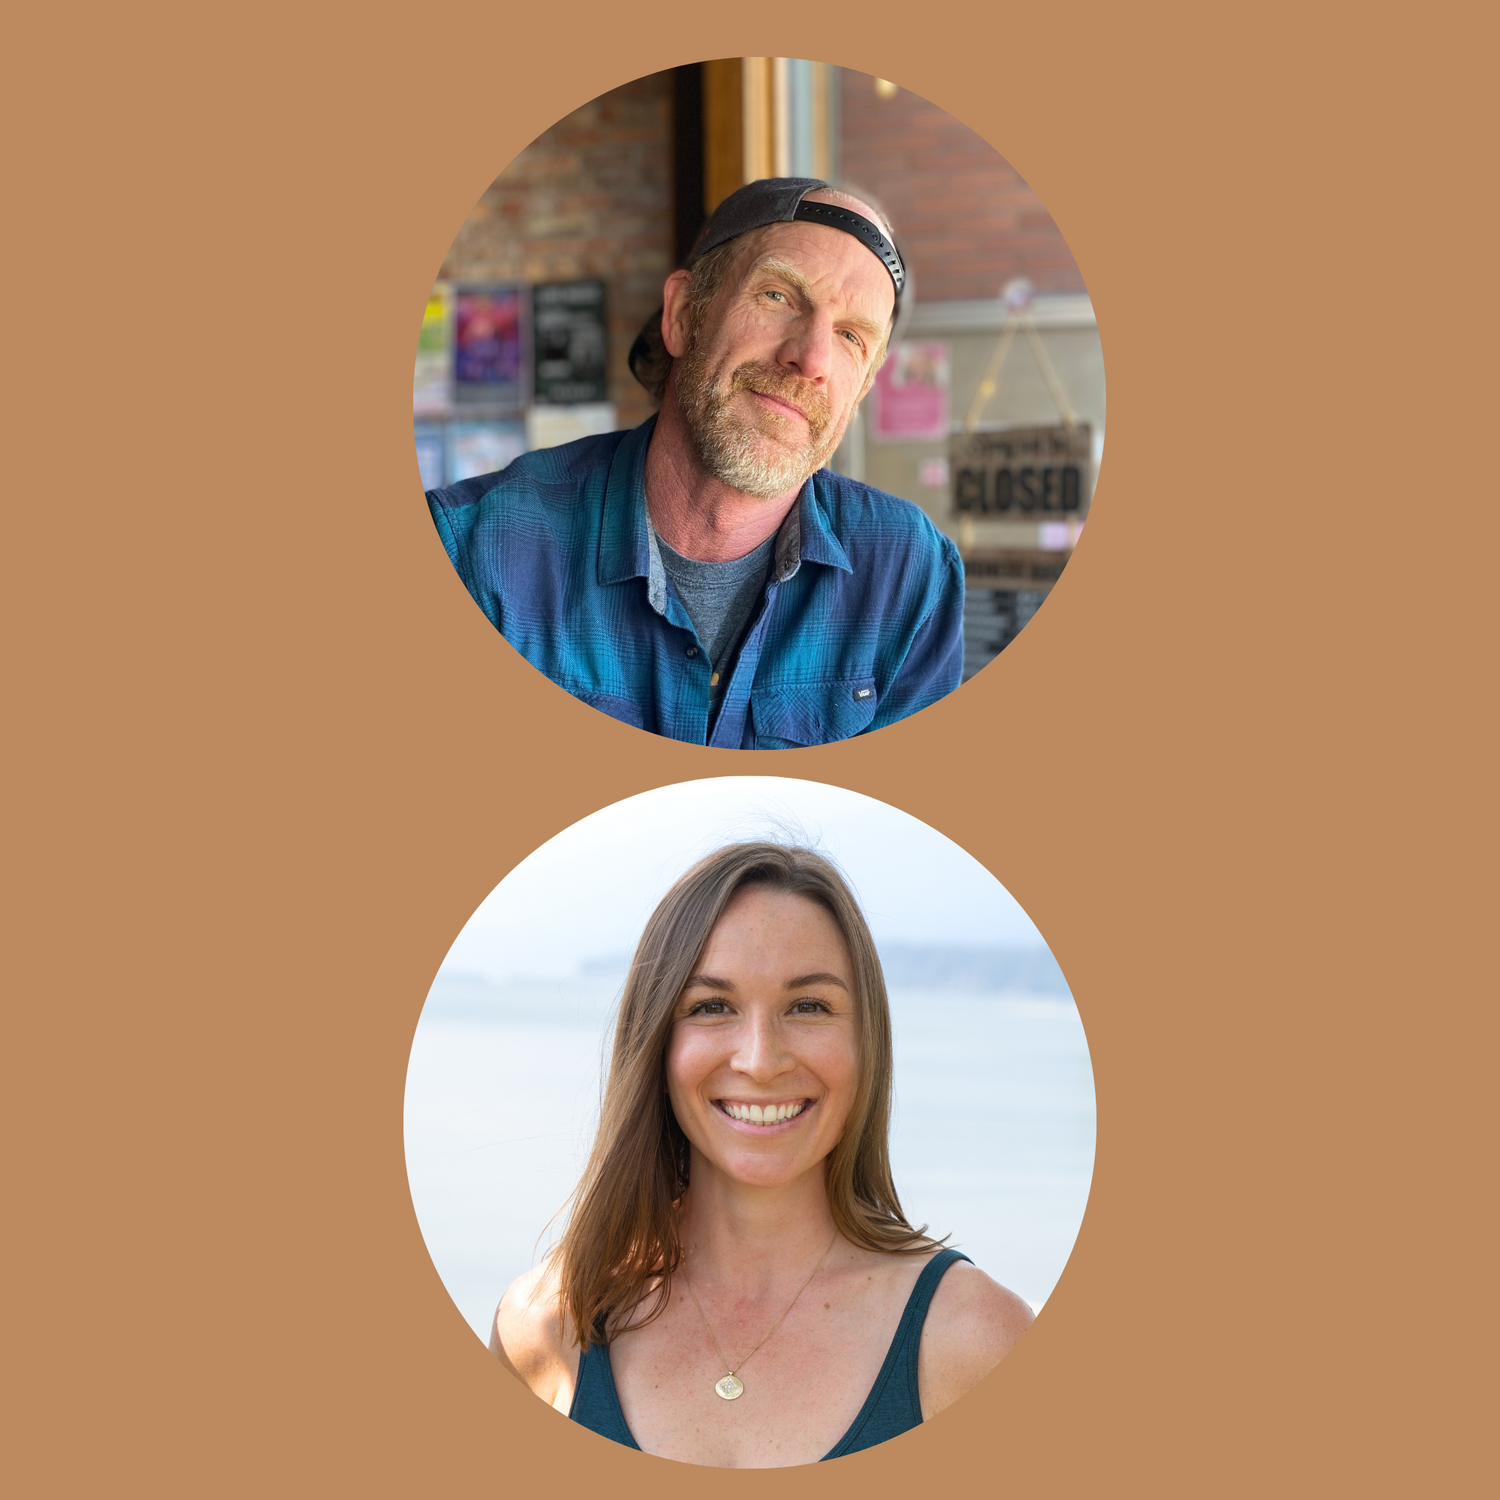 Image of the retreat leaders, Shaun Naughton and Katie Halsted, for the Soulside spring renewal and recovery yoga retreat in baja california, mexico